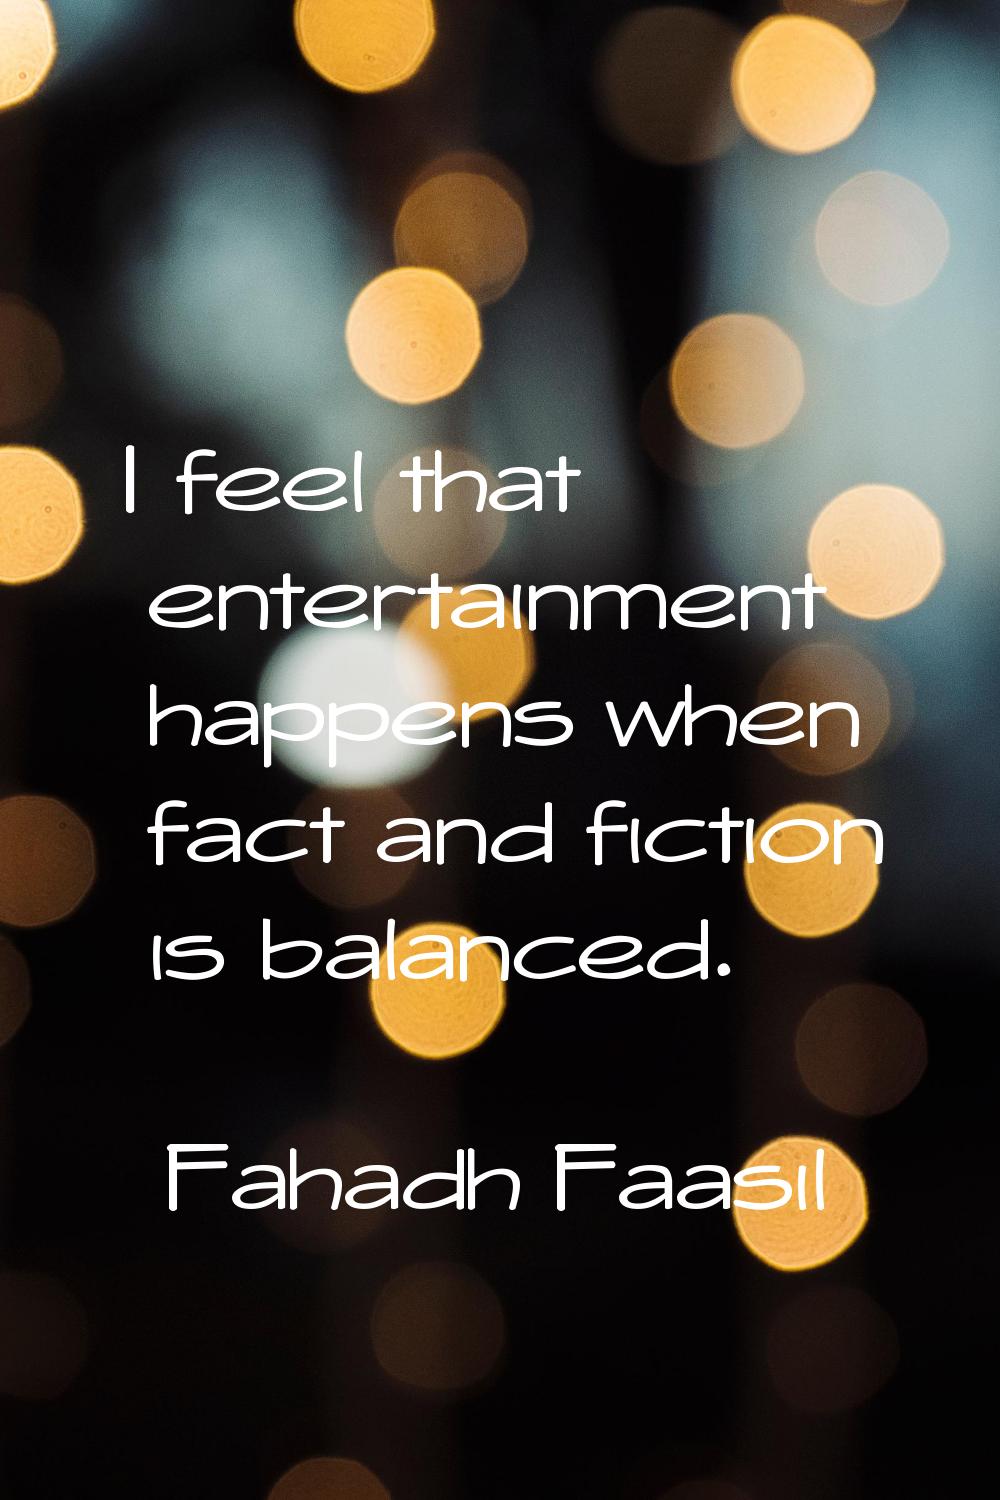 I feel that entertainment happens when fact and fiction is balanced.